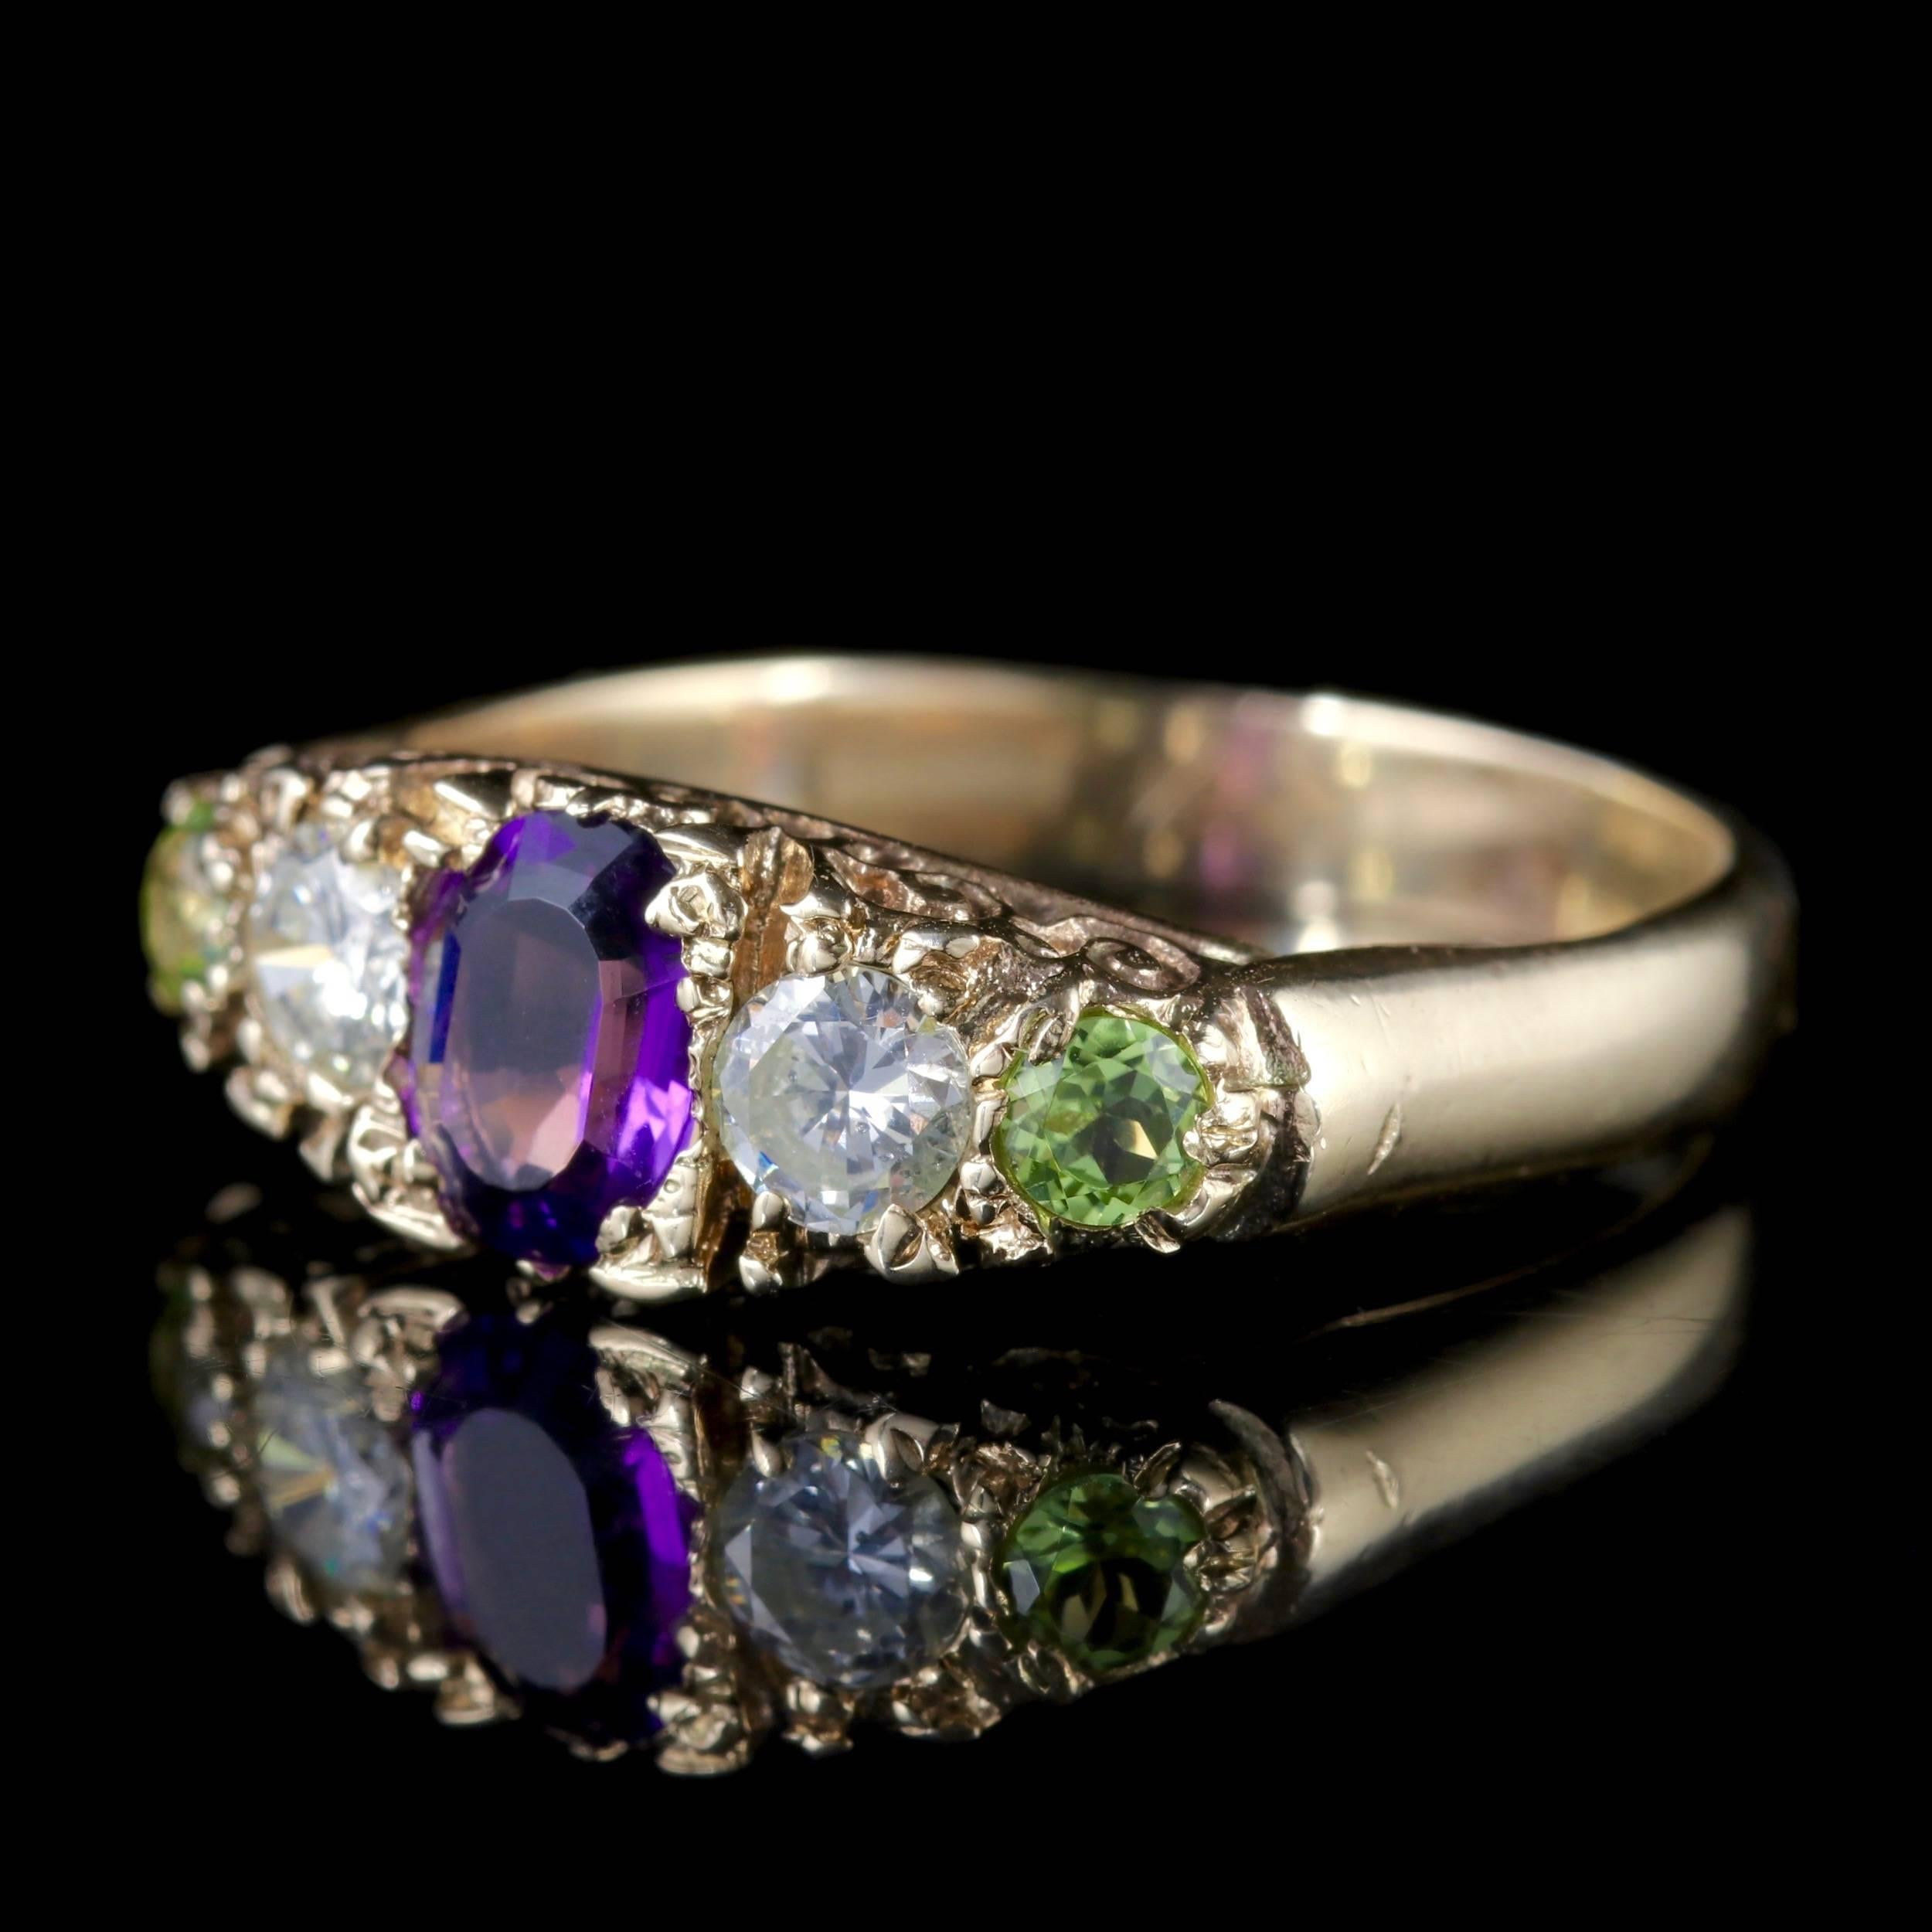 To read more please click continue reading below-

This spectacular antique Victorian ring was made representing the Suffragette movement, circa 1900.

Suffragettes liked to be depicted as feminine, their jewellery popularly consisted of Violet,